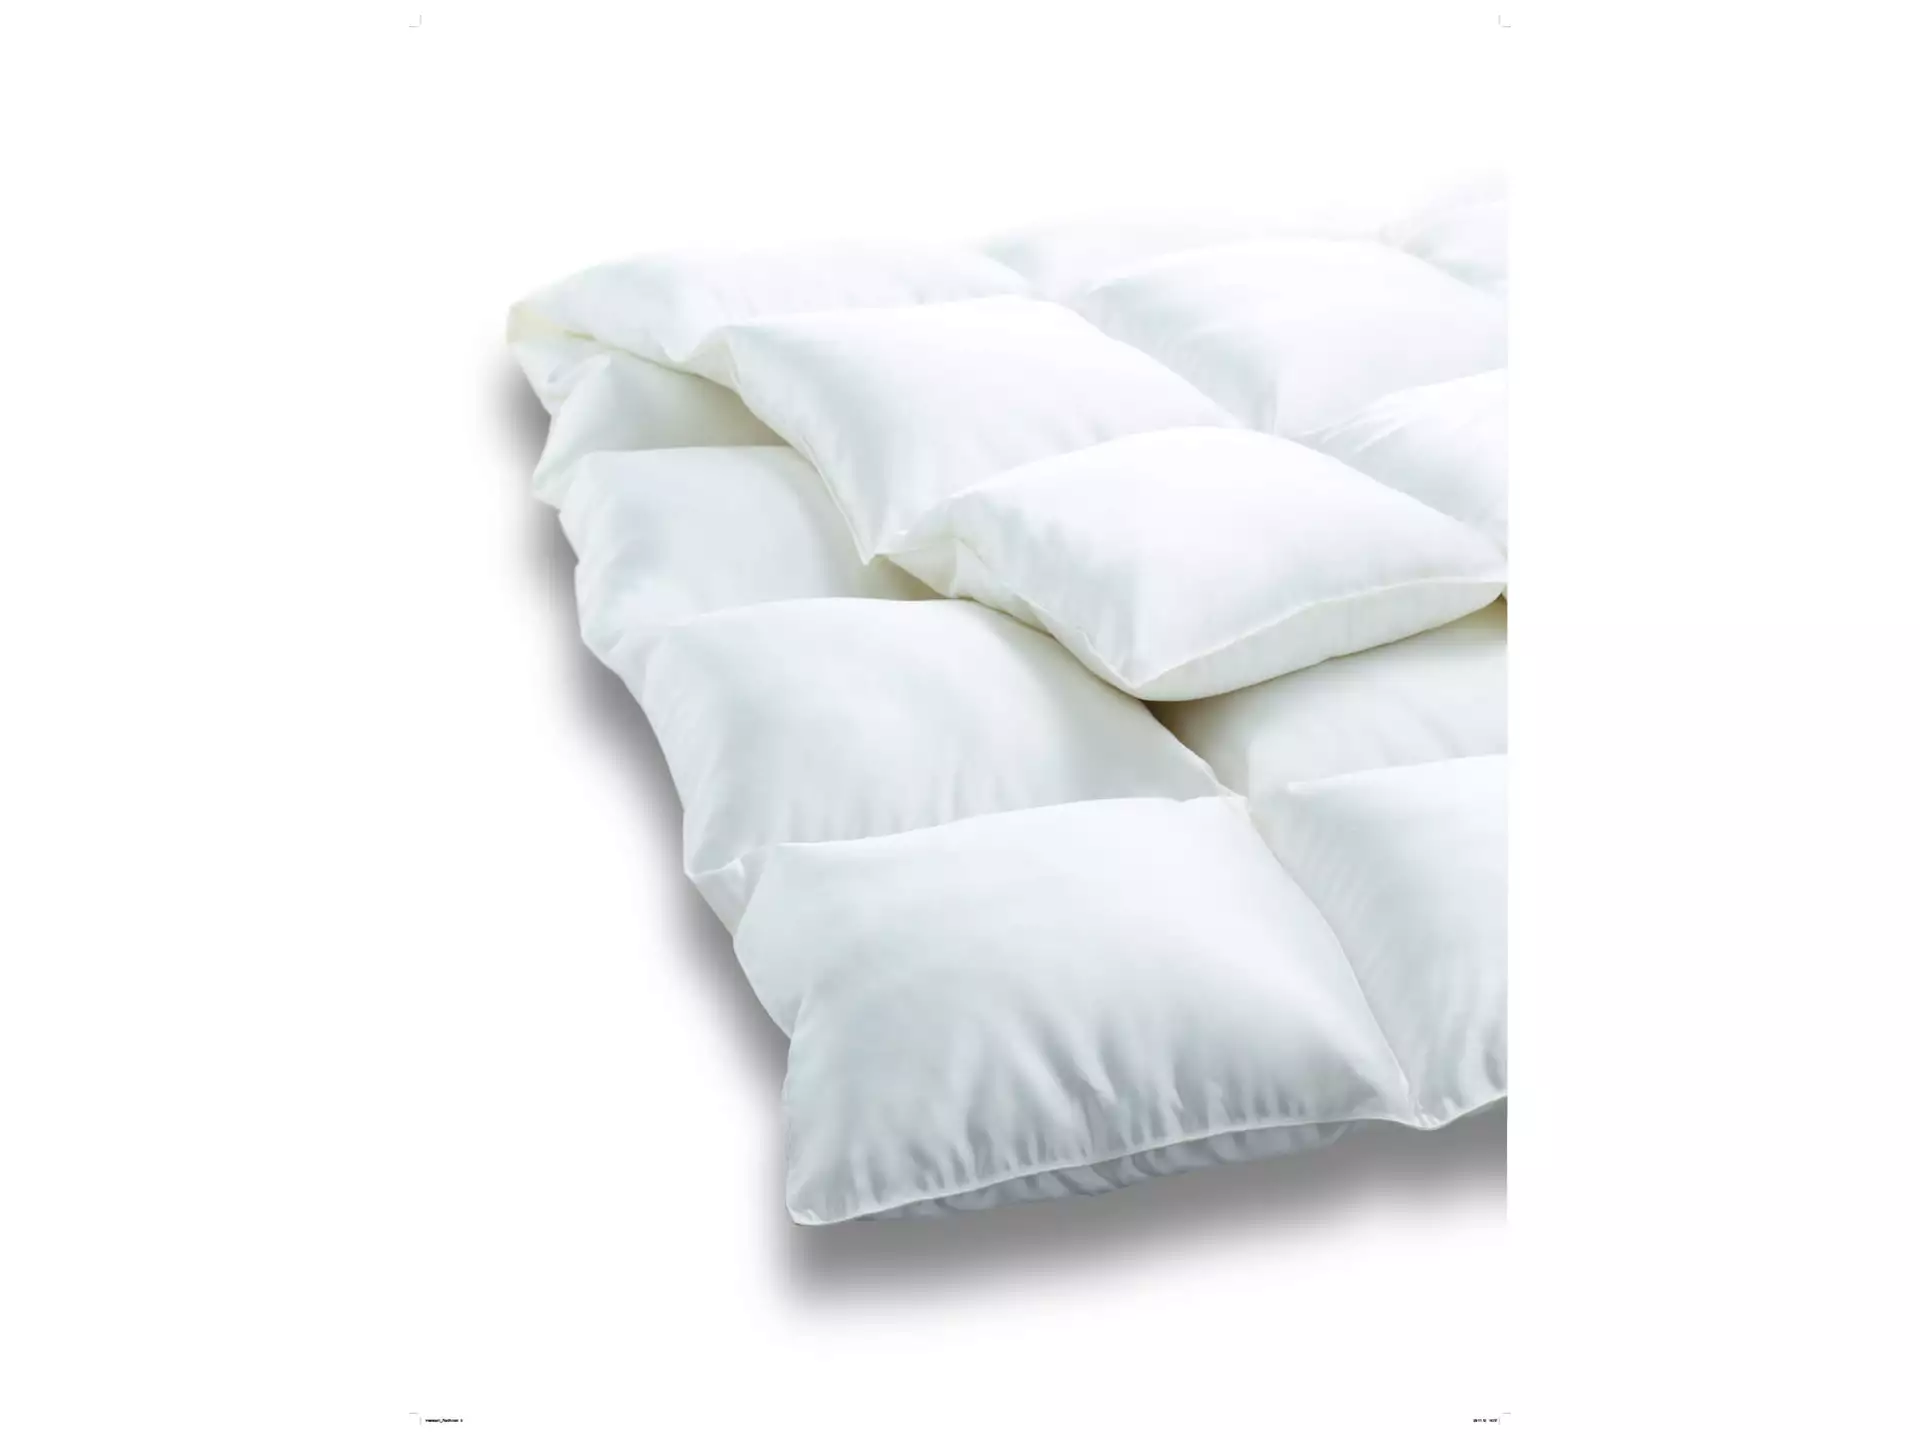 Ganzjahresduvet Excellence Cosy Billerbeck / Farbe: Champagner / Material: